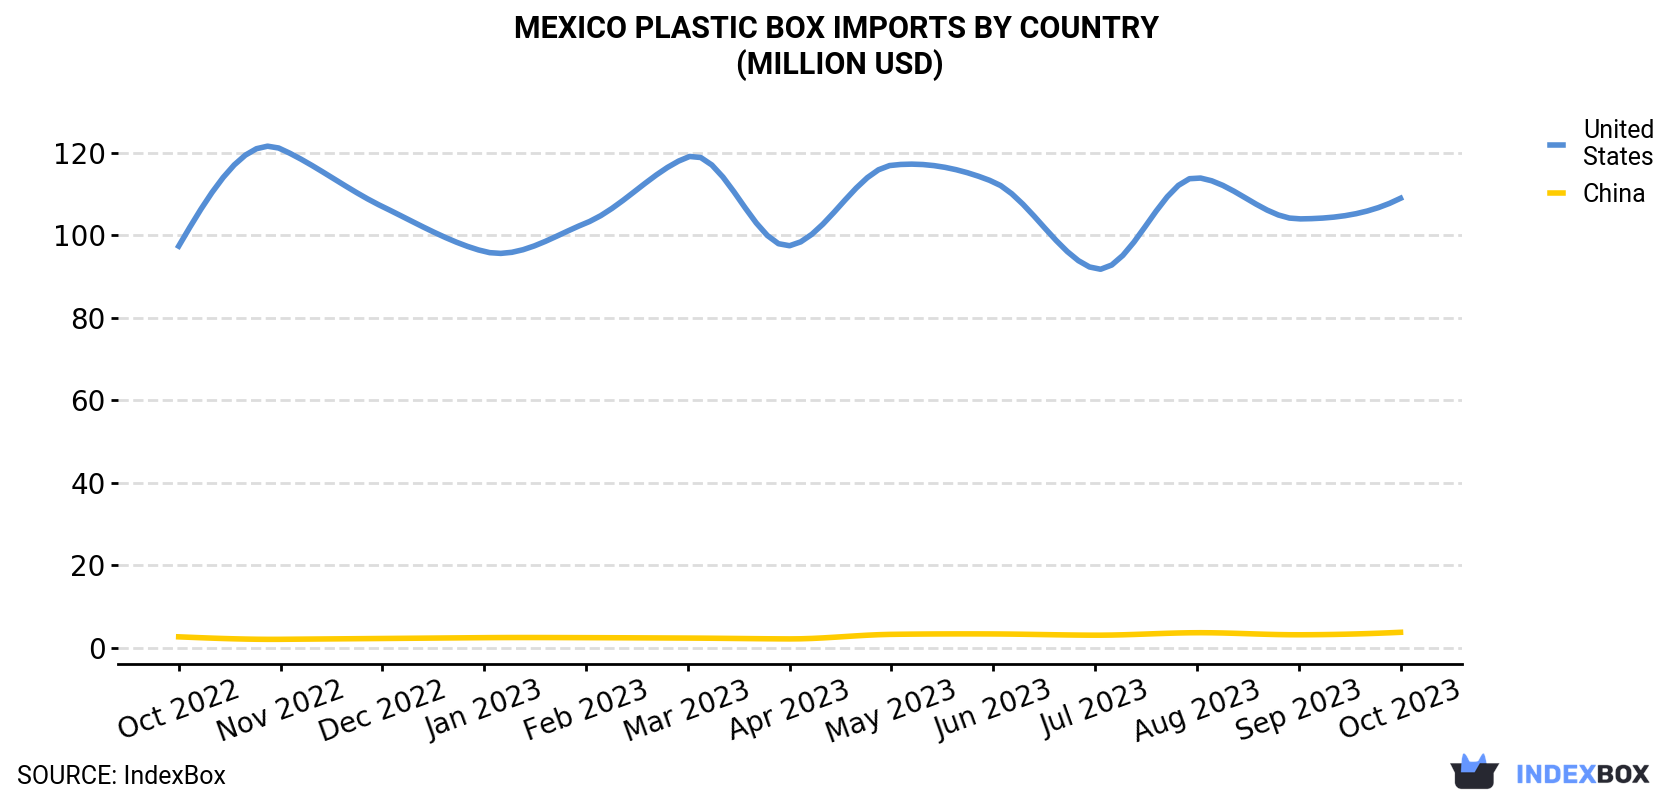 Mexico Plastic Box Imports By Country (Million USD)